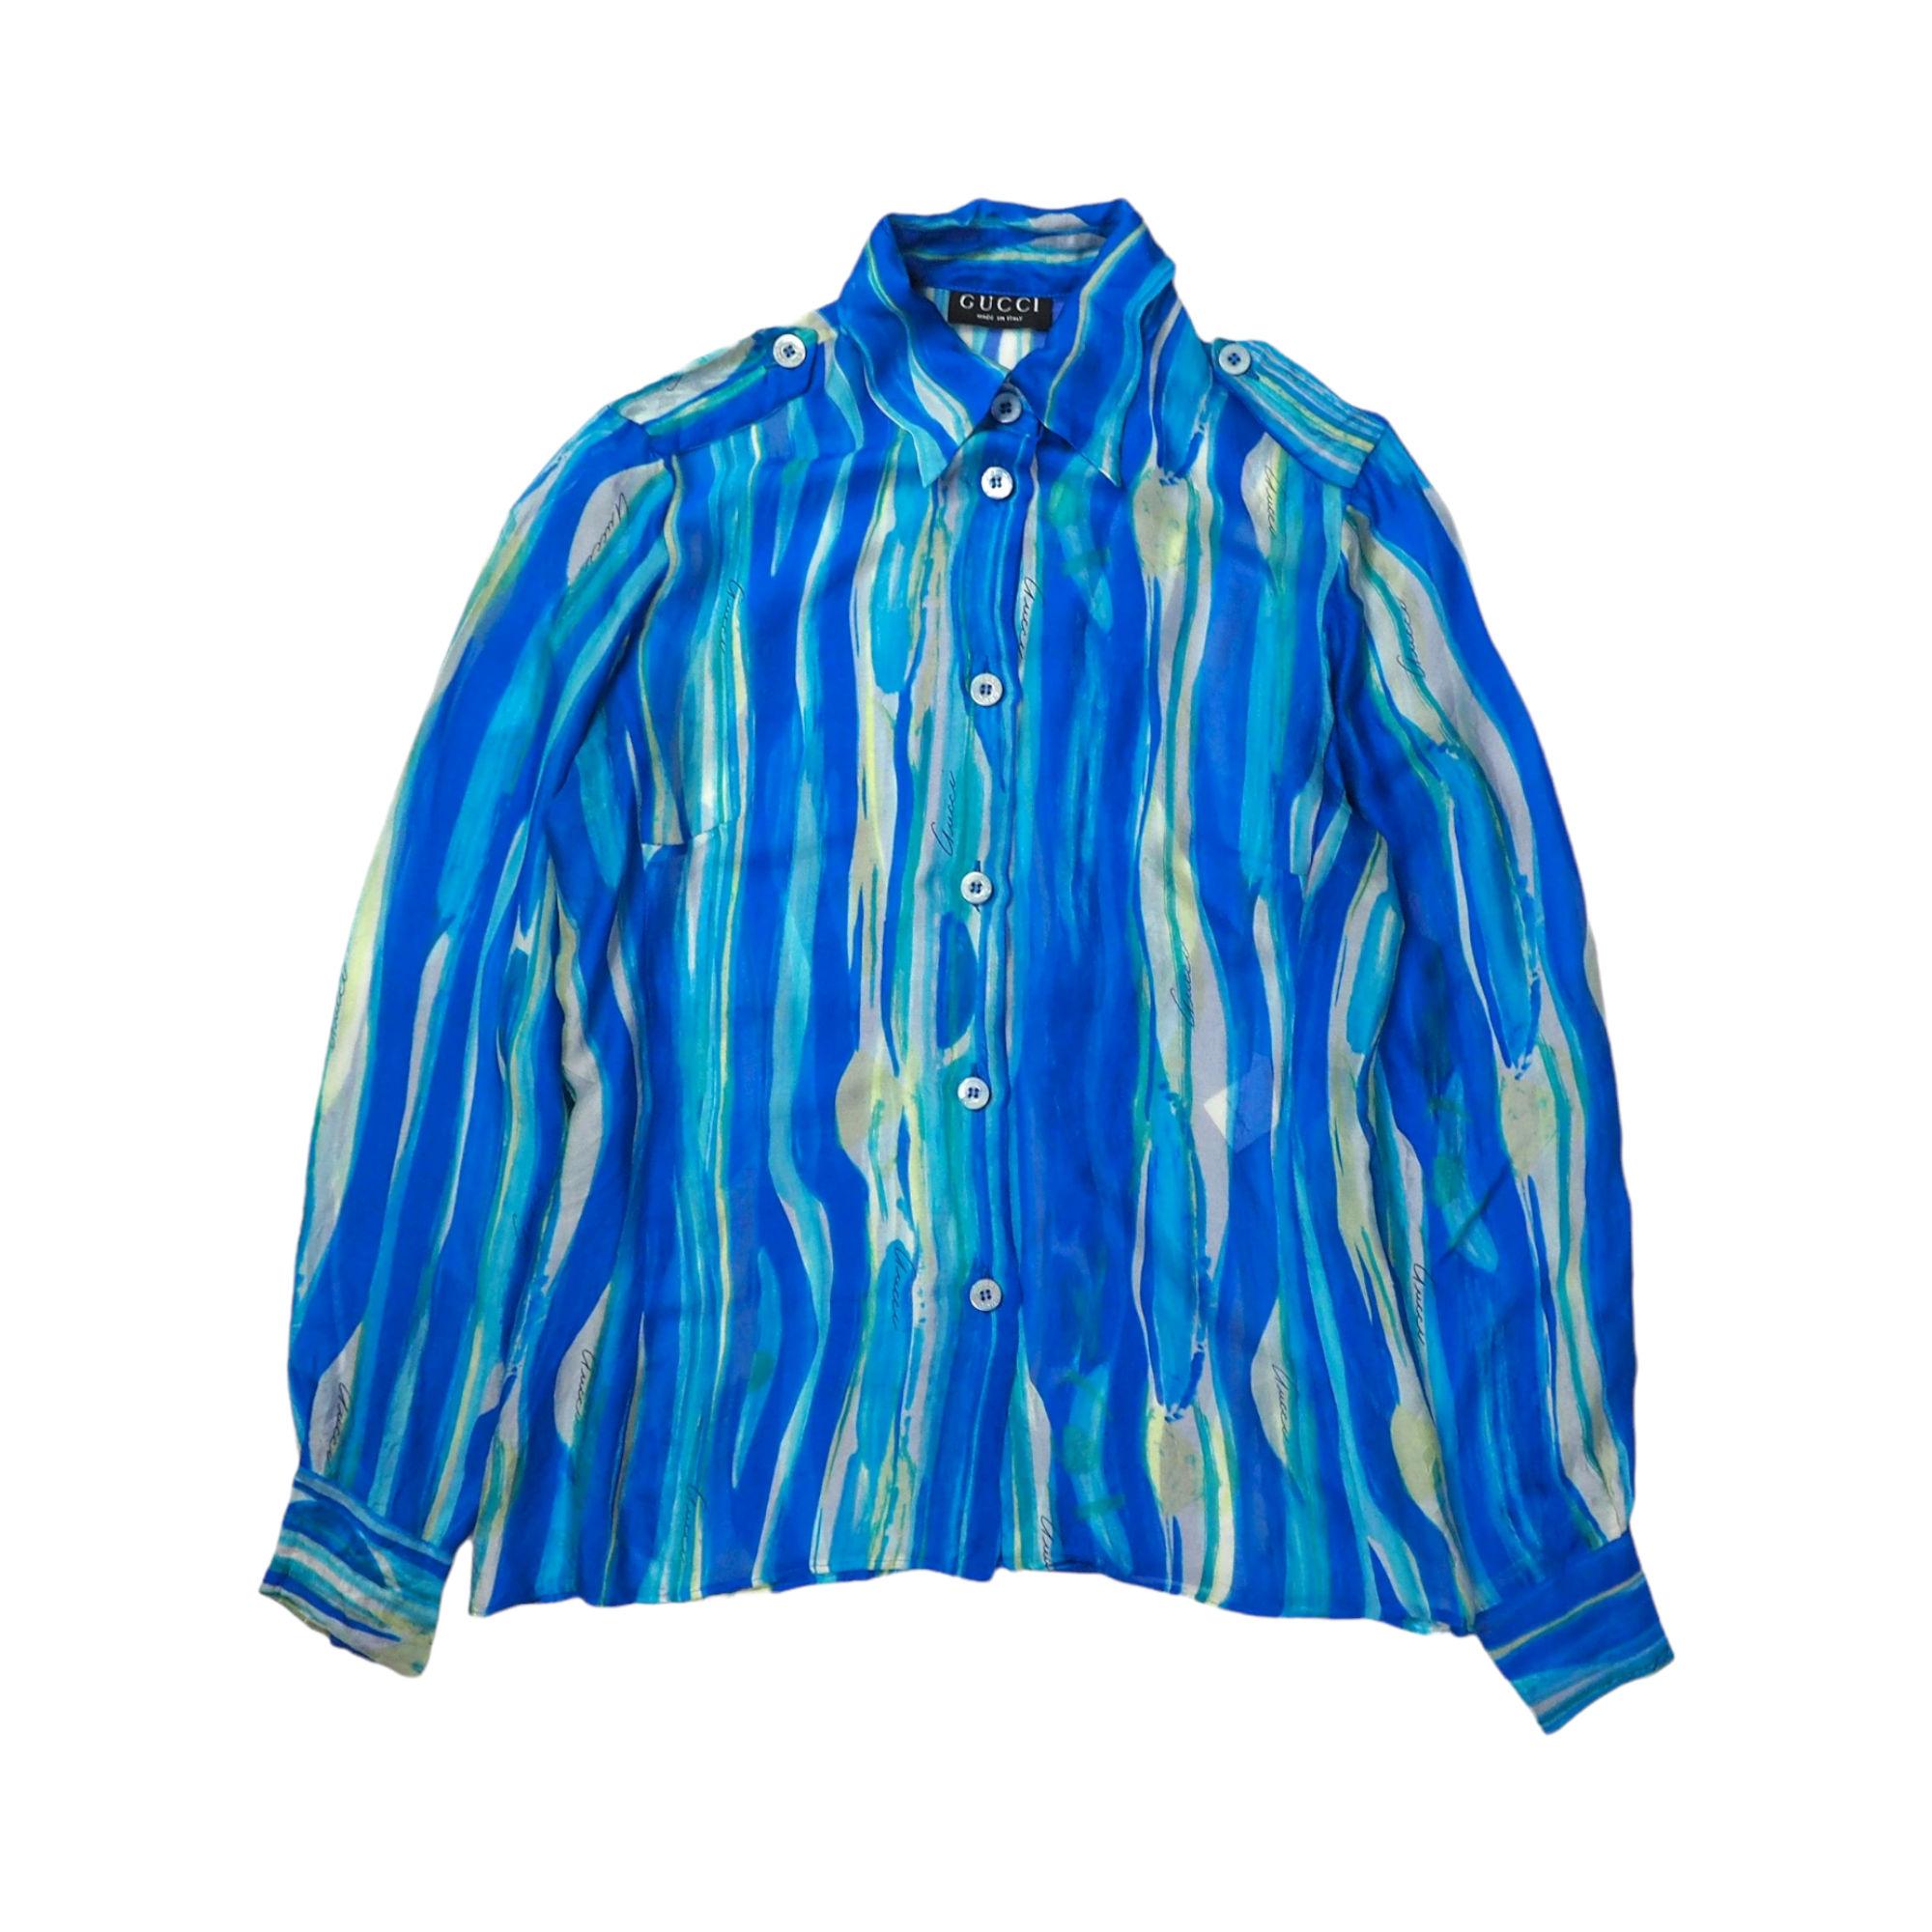 GUCCI S/S 1996 by Tom Ford Abstract Colour Printed Silk Sheer Shirt For Sale 1